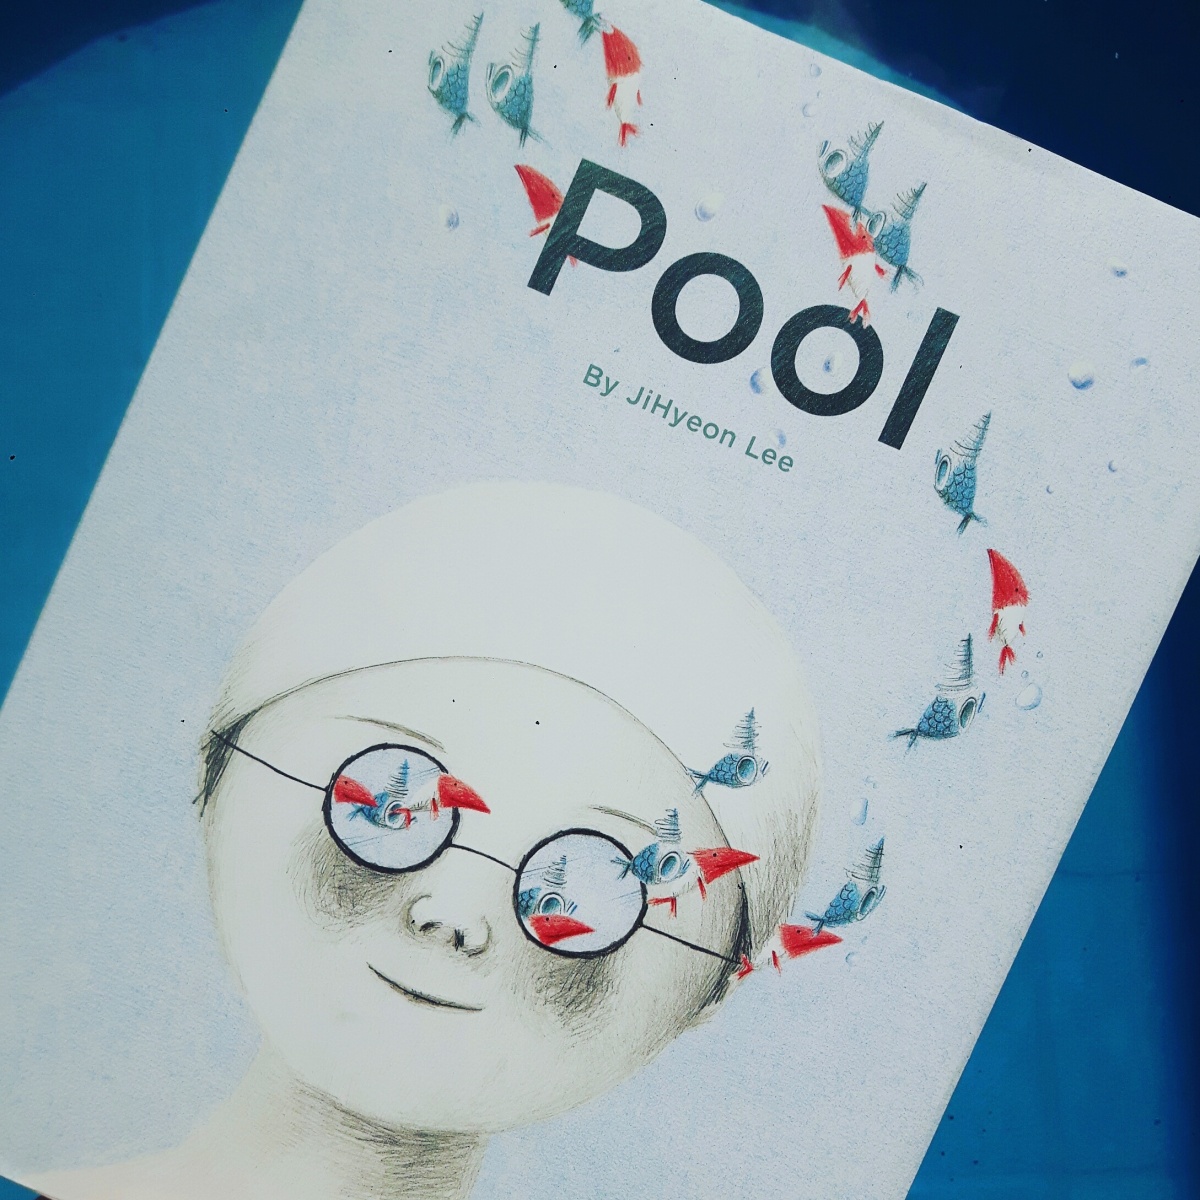 Reviews in Brief: Pool by JiHyeon Lee – Two in a Tepee